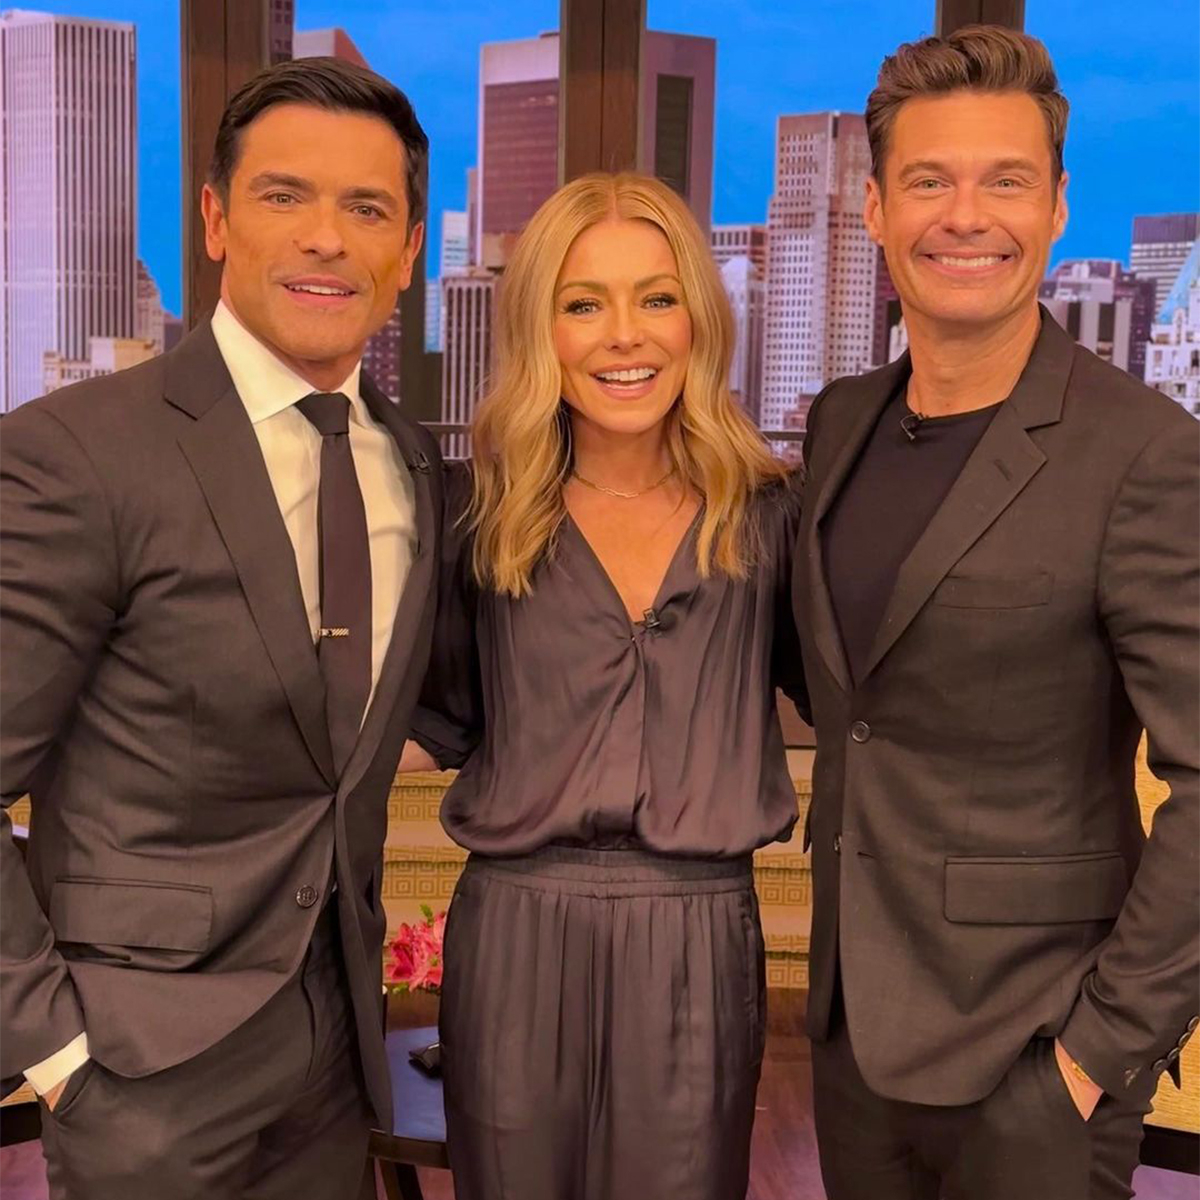 Ryan Seacrest Reacts to Mark Consuelos’ First Week on Live